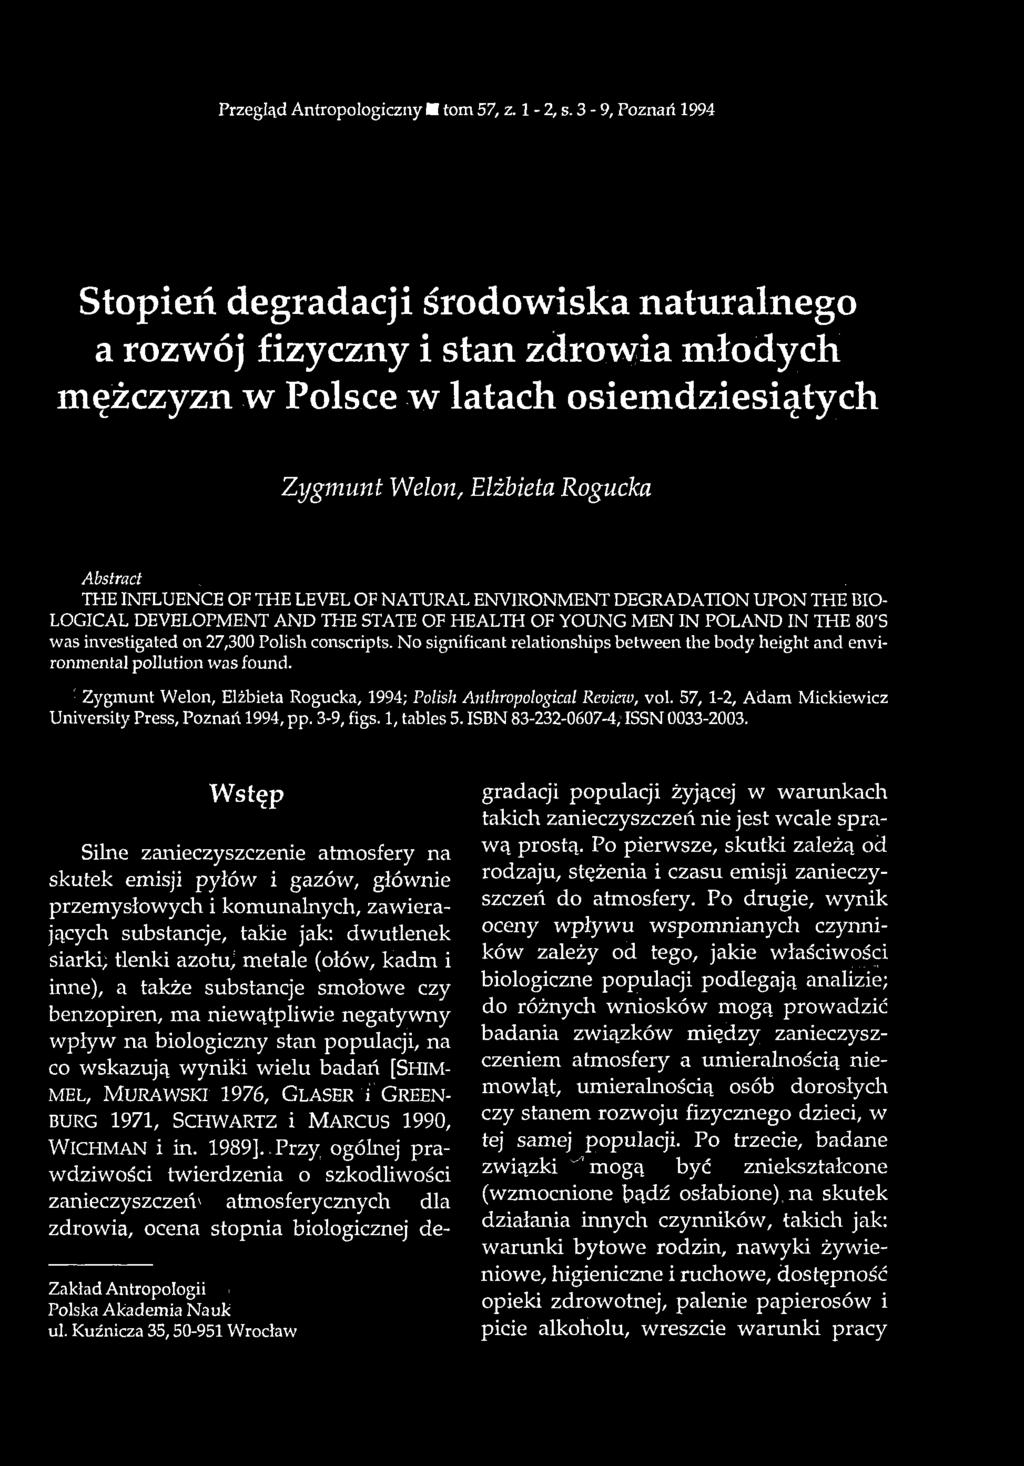 . THE INFLUENCE OF THE LEVEL OF NATURAL ENVIRONMENT DEGRADATION UPON THE BIO LOGICAL DEVELOPMENT AND THE STATE OF HEALTH OF YOUNG MEN IN POLAND IN THE 80'S was investigated on 27,300 Polish conscripts.